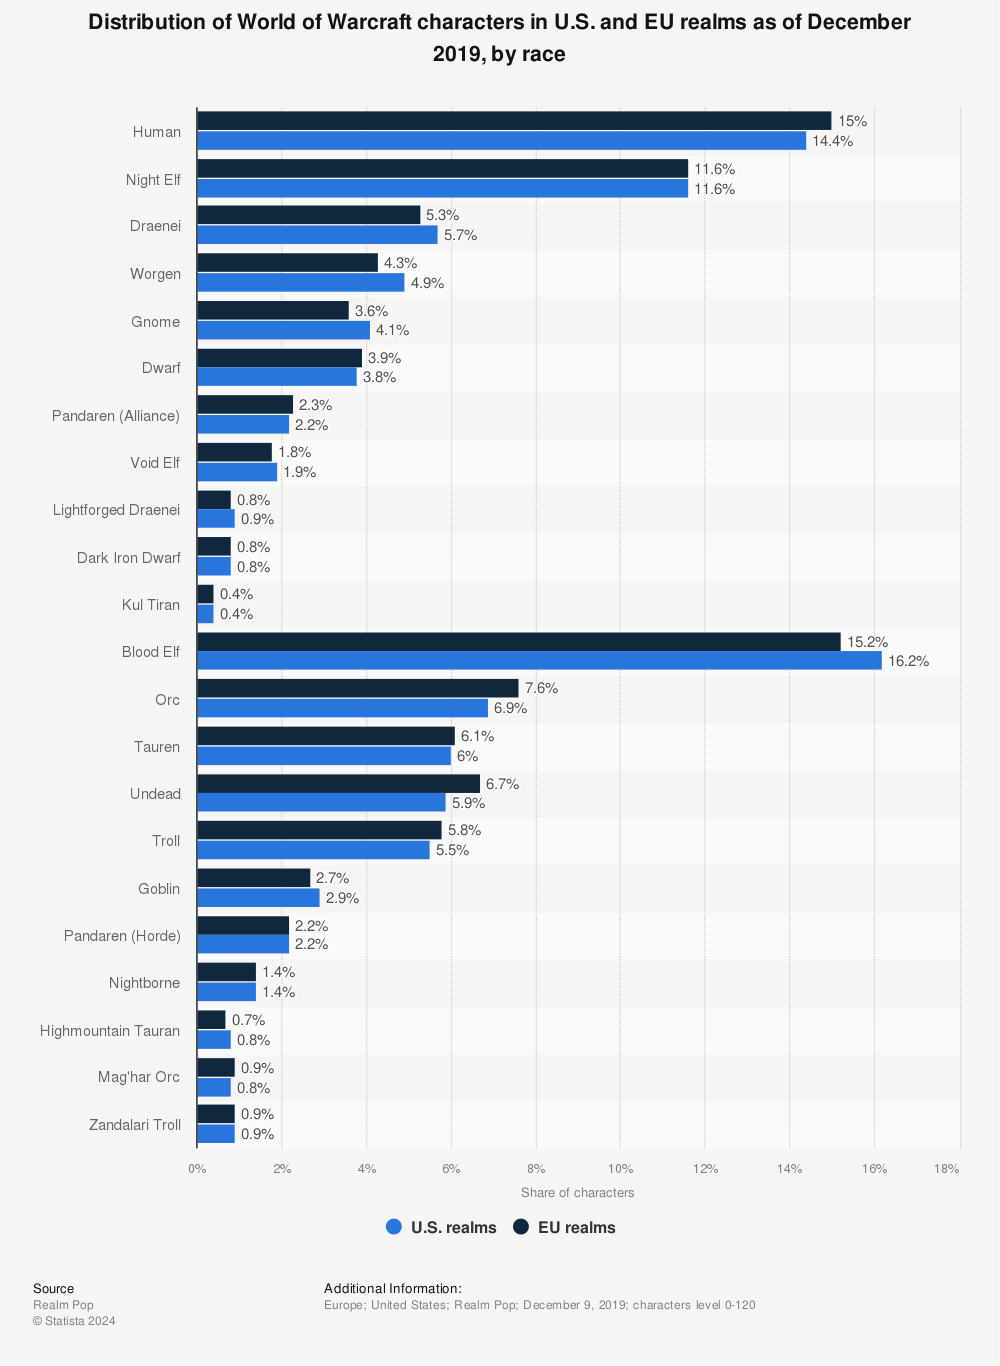 Statistic: Distribution of World of Warcraft characters in U.S. and EU realms as of December 2019, by race | Statista